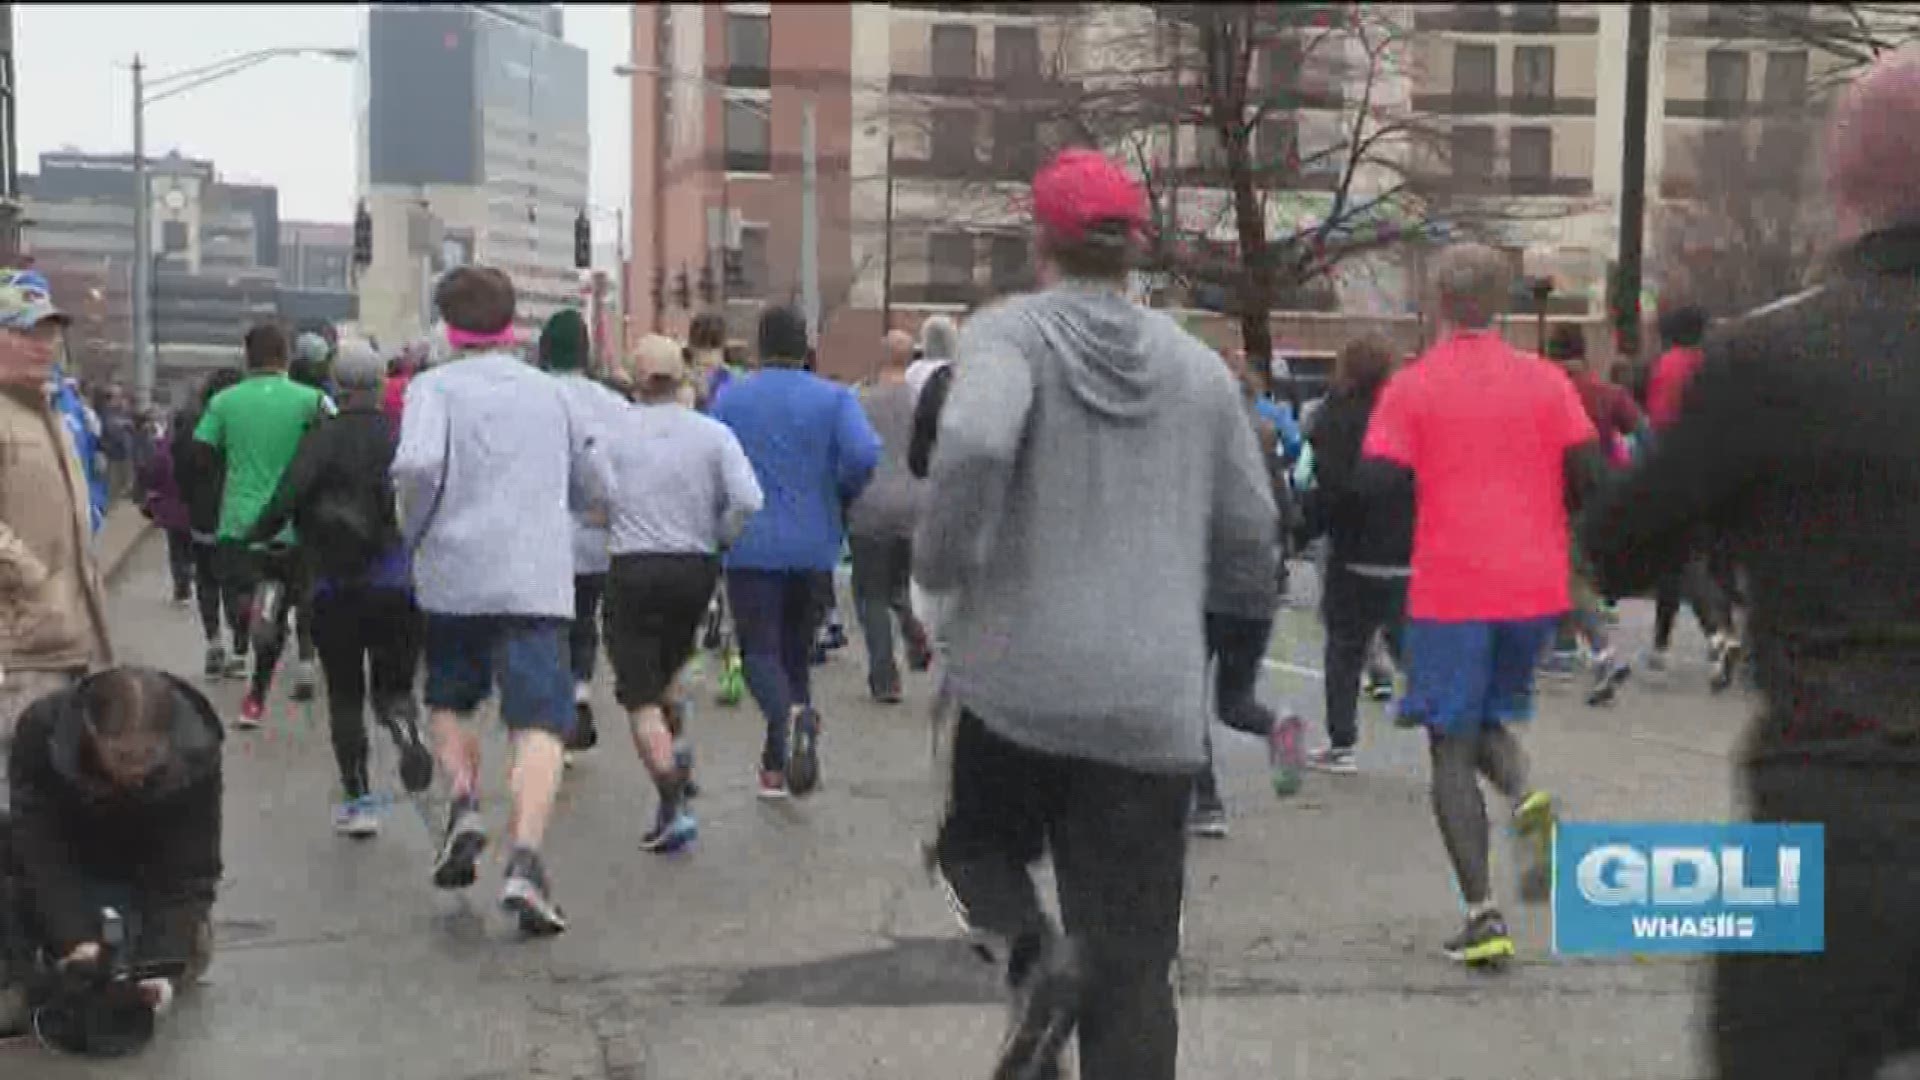 Training is getting underway for runners and walkers participating in the Kentucky Derby Festival mini-marathon and marathon. Both races will be on April 27, 2019.